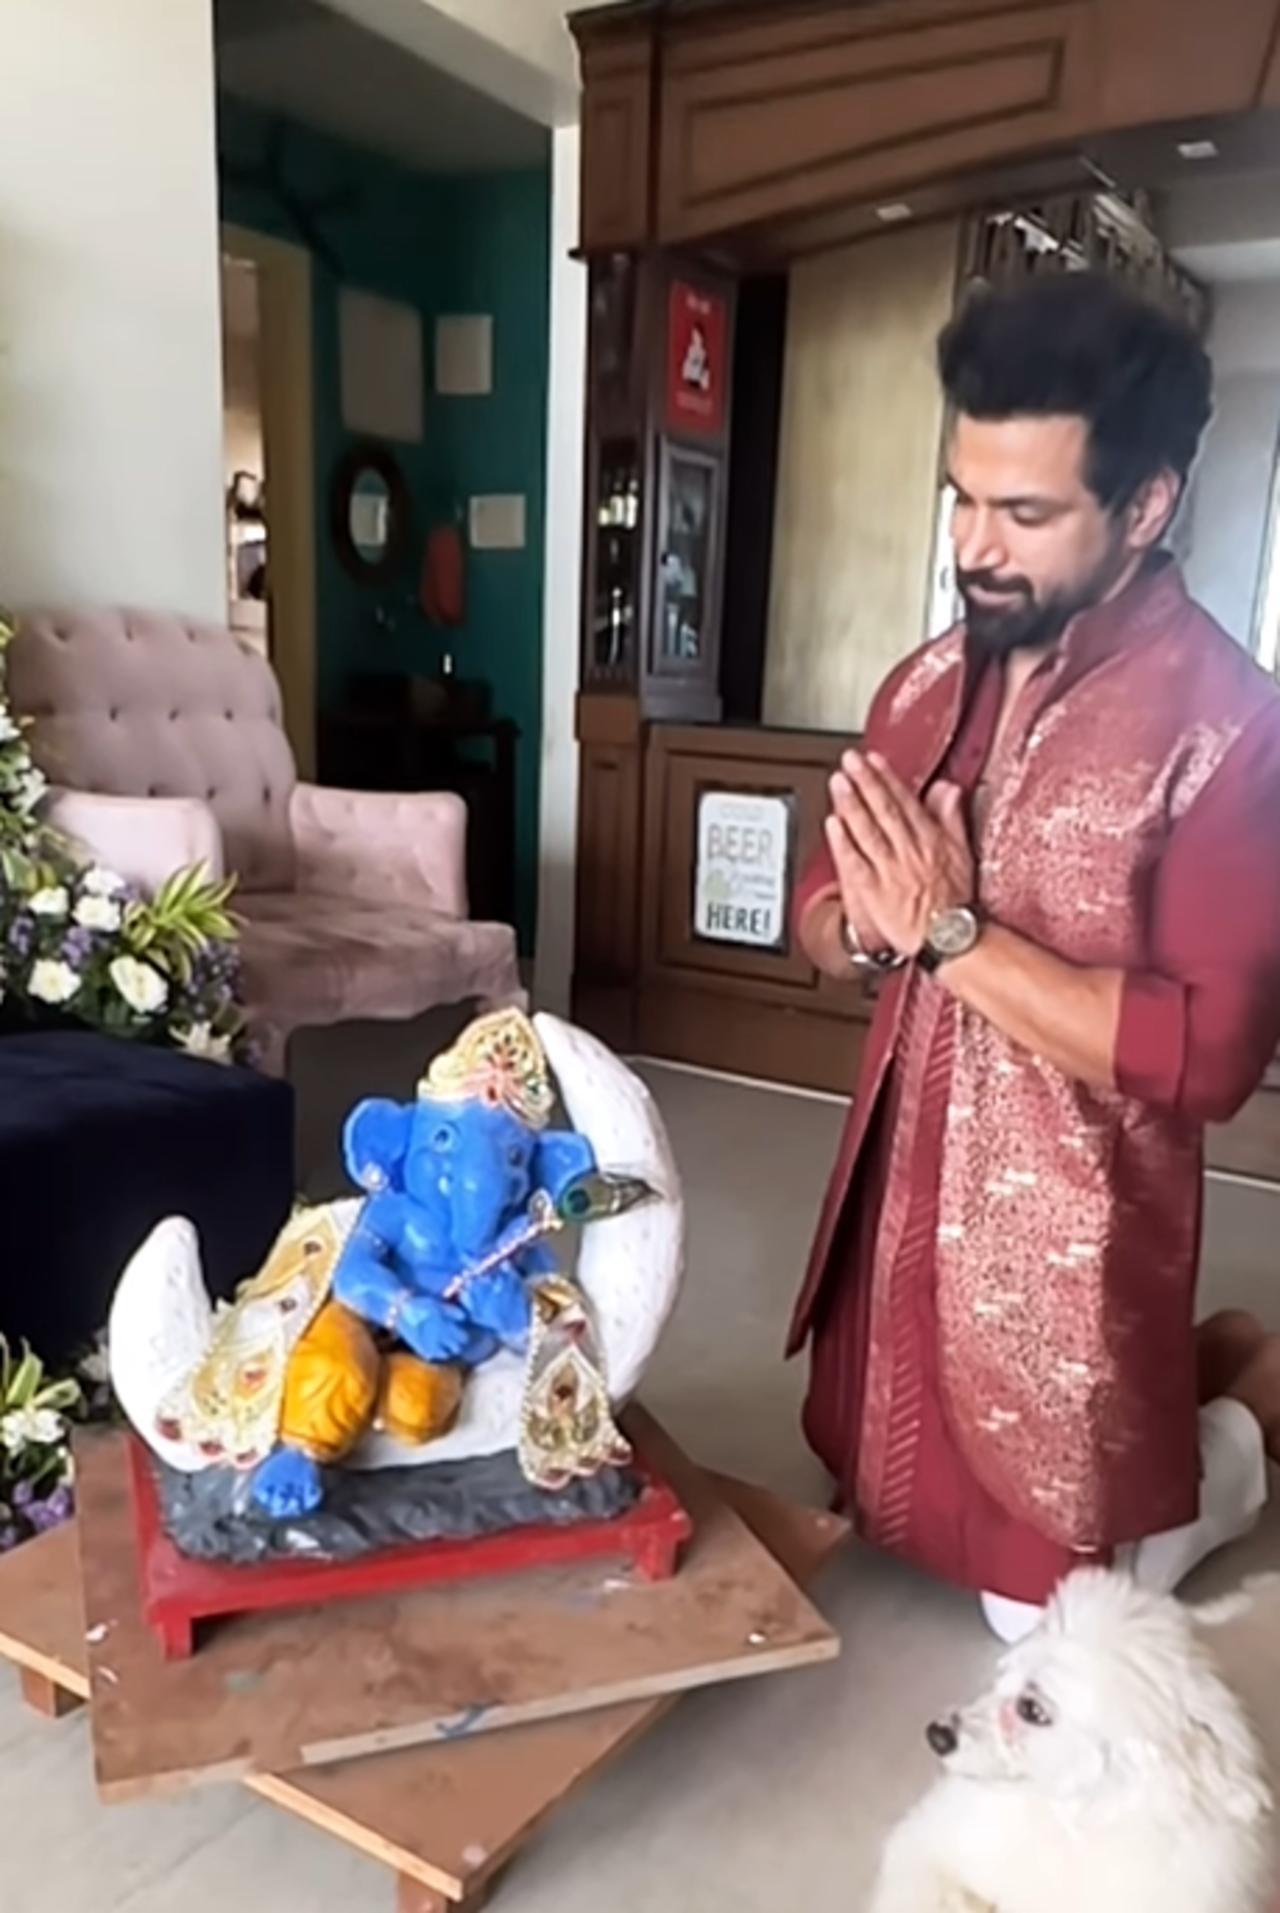 Rithvik Dhanjani carves his own Ganpati idol at home every year. This year was no different. They celebrated the festival in an eco-friendly way